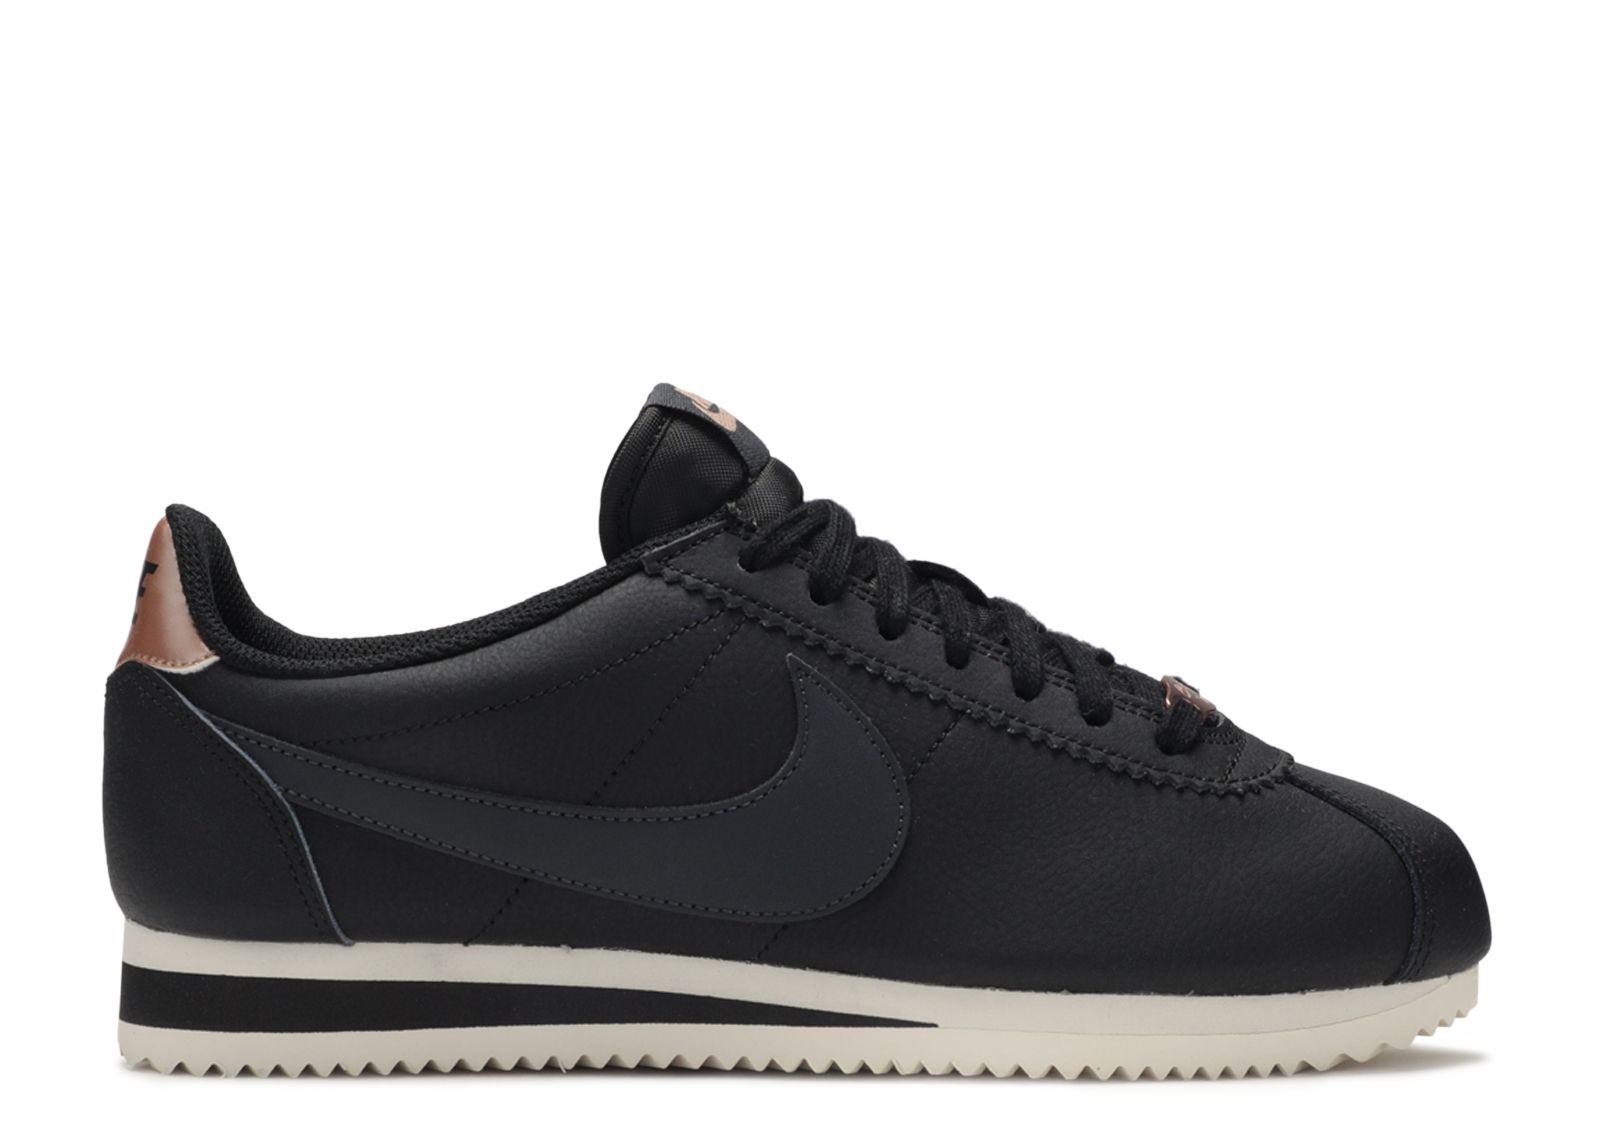 Nike Classic Cortez Leather Luxe Trainers In Black And Metallic Bronze, ASOS